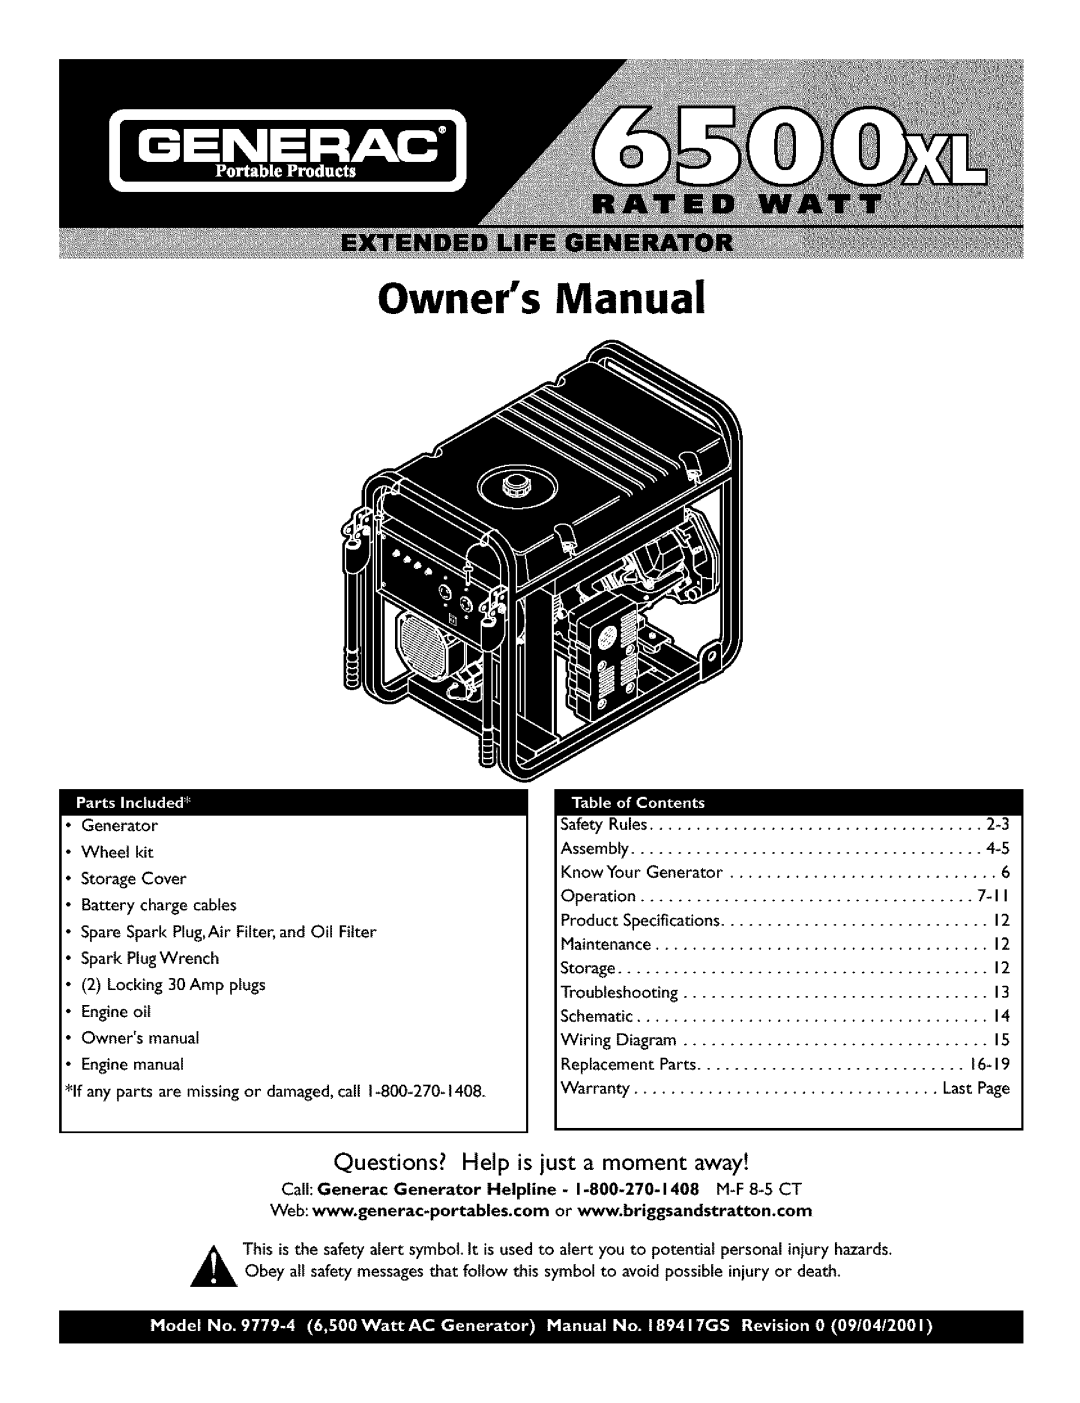 Generac 6500XL owner manual Questions? Help is just a moment away, Locking30 Amp plugs 